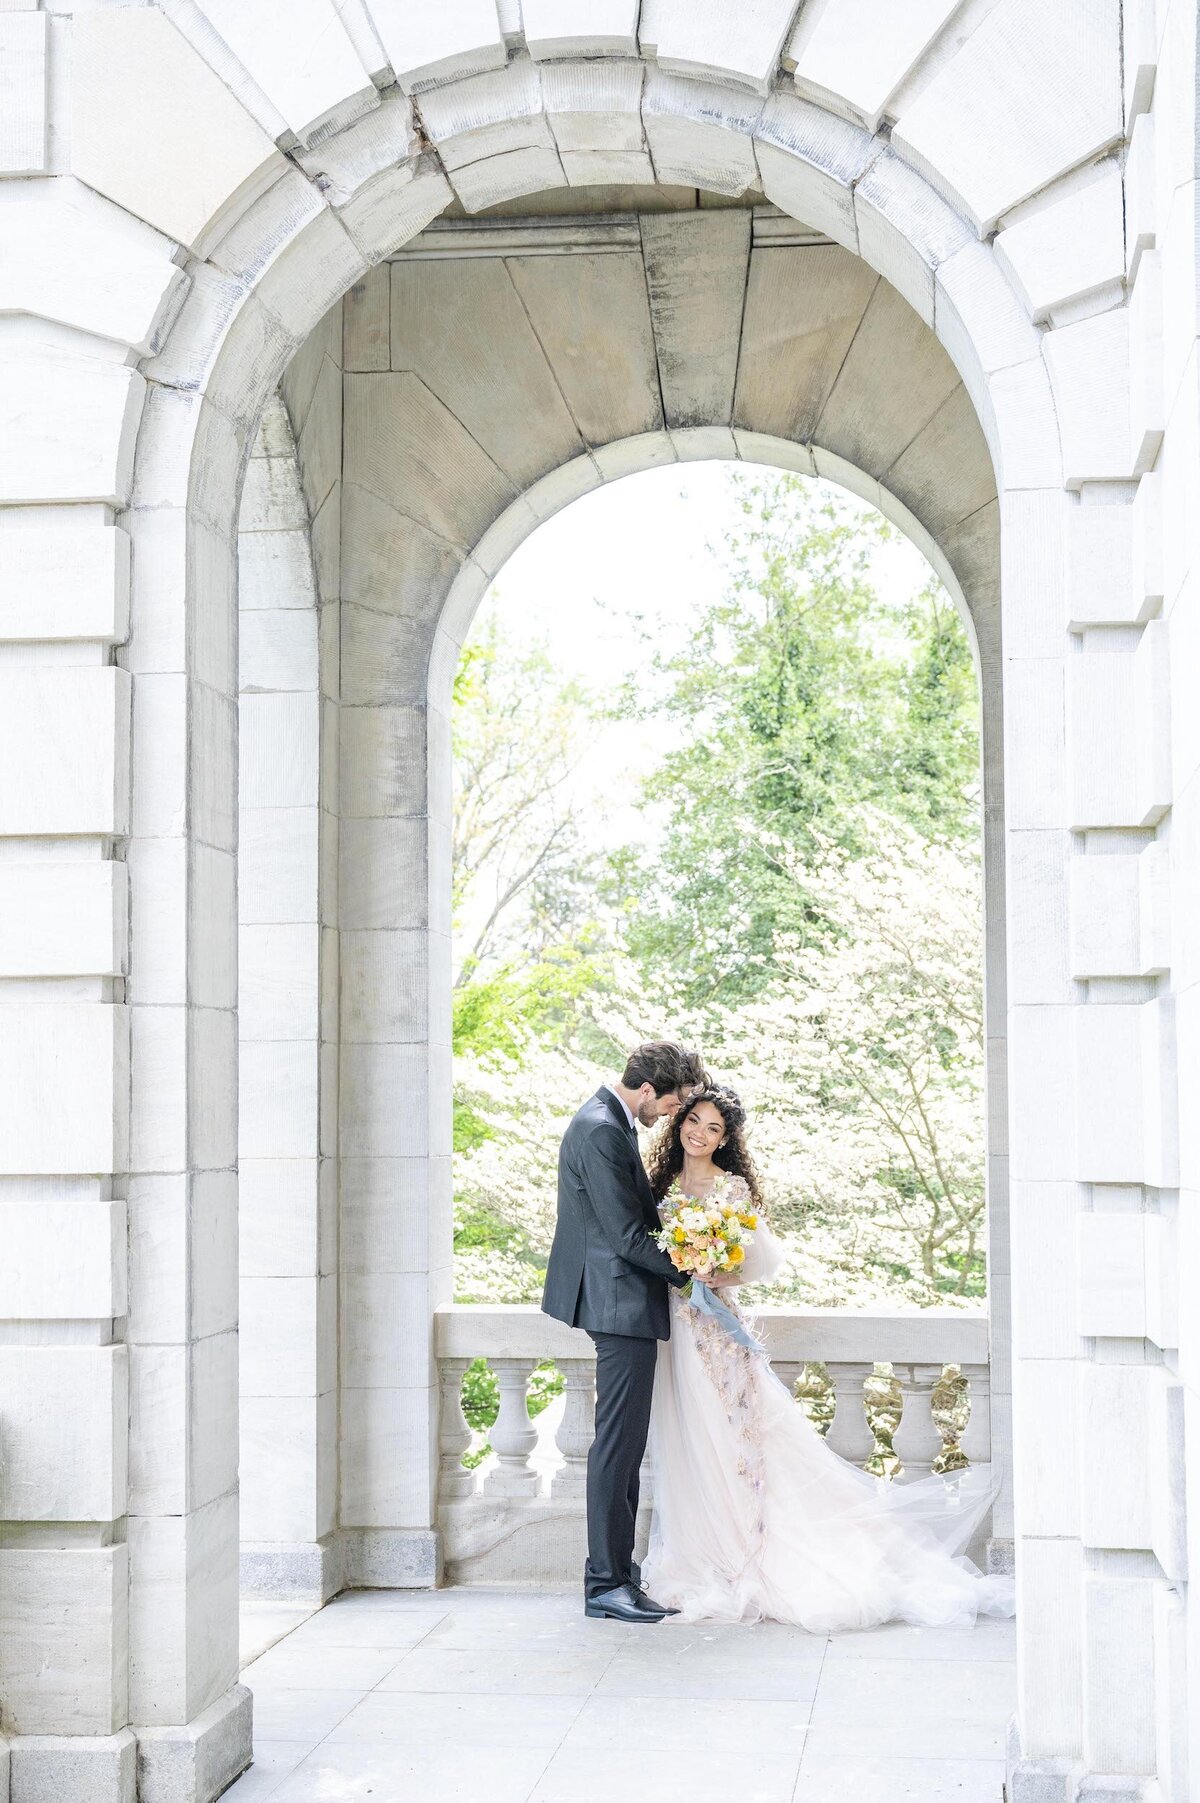 Bride and groom archway